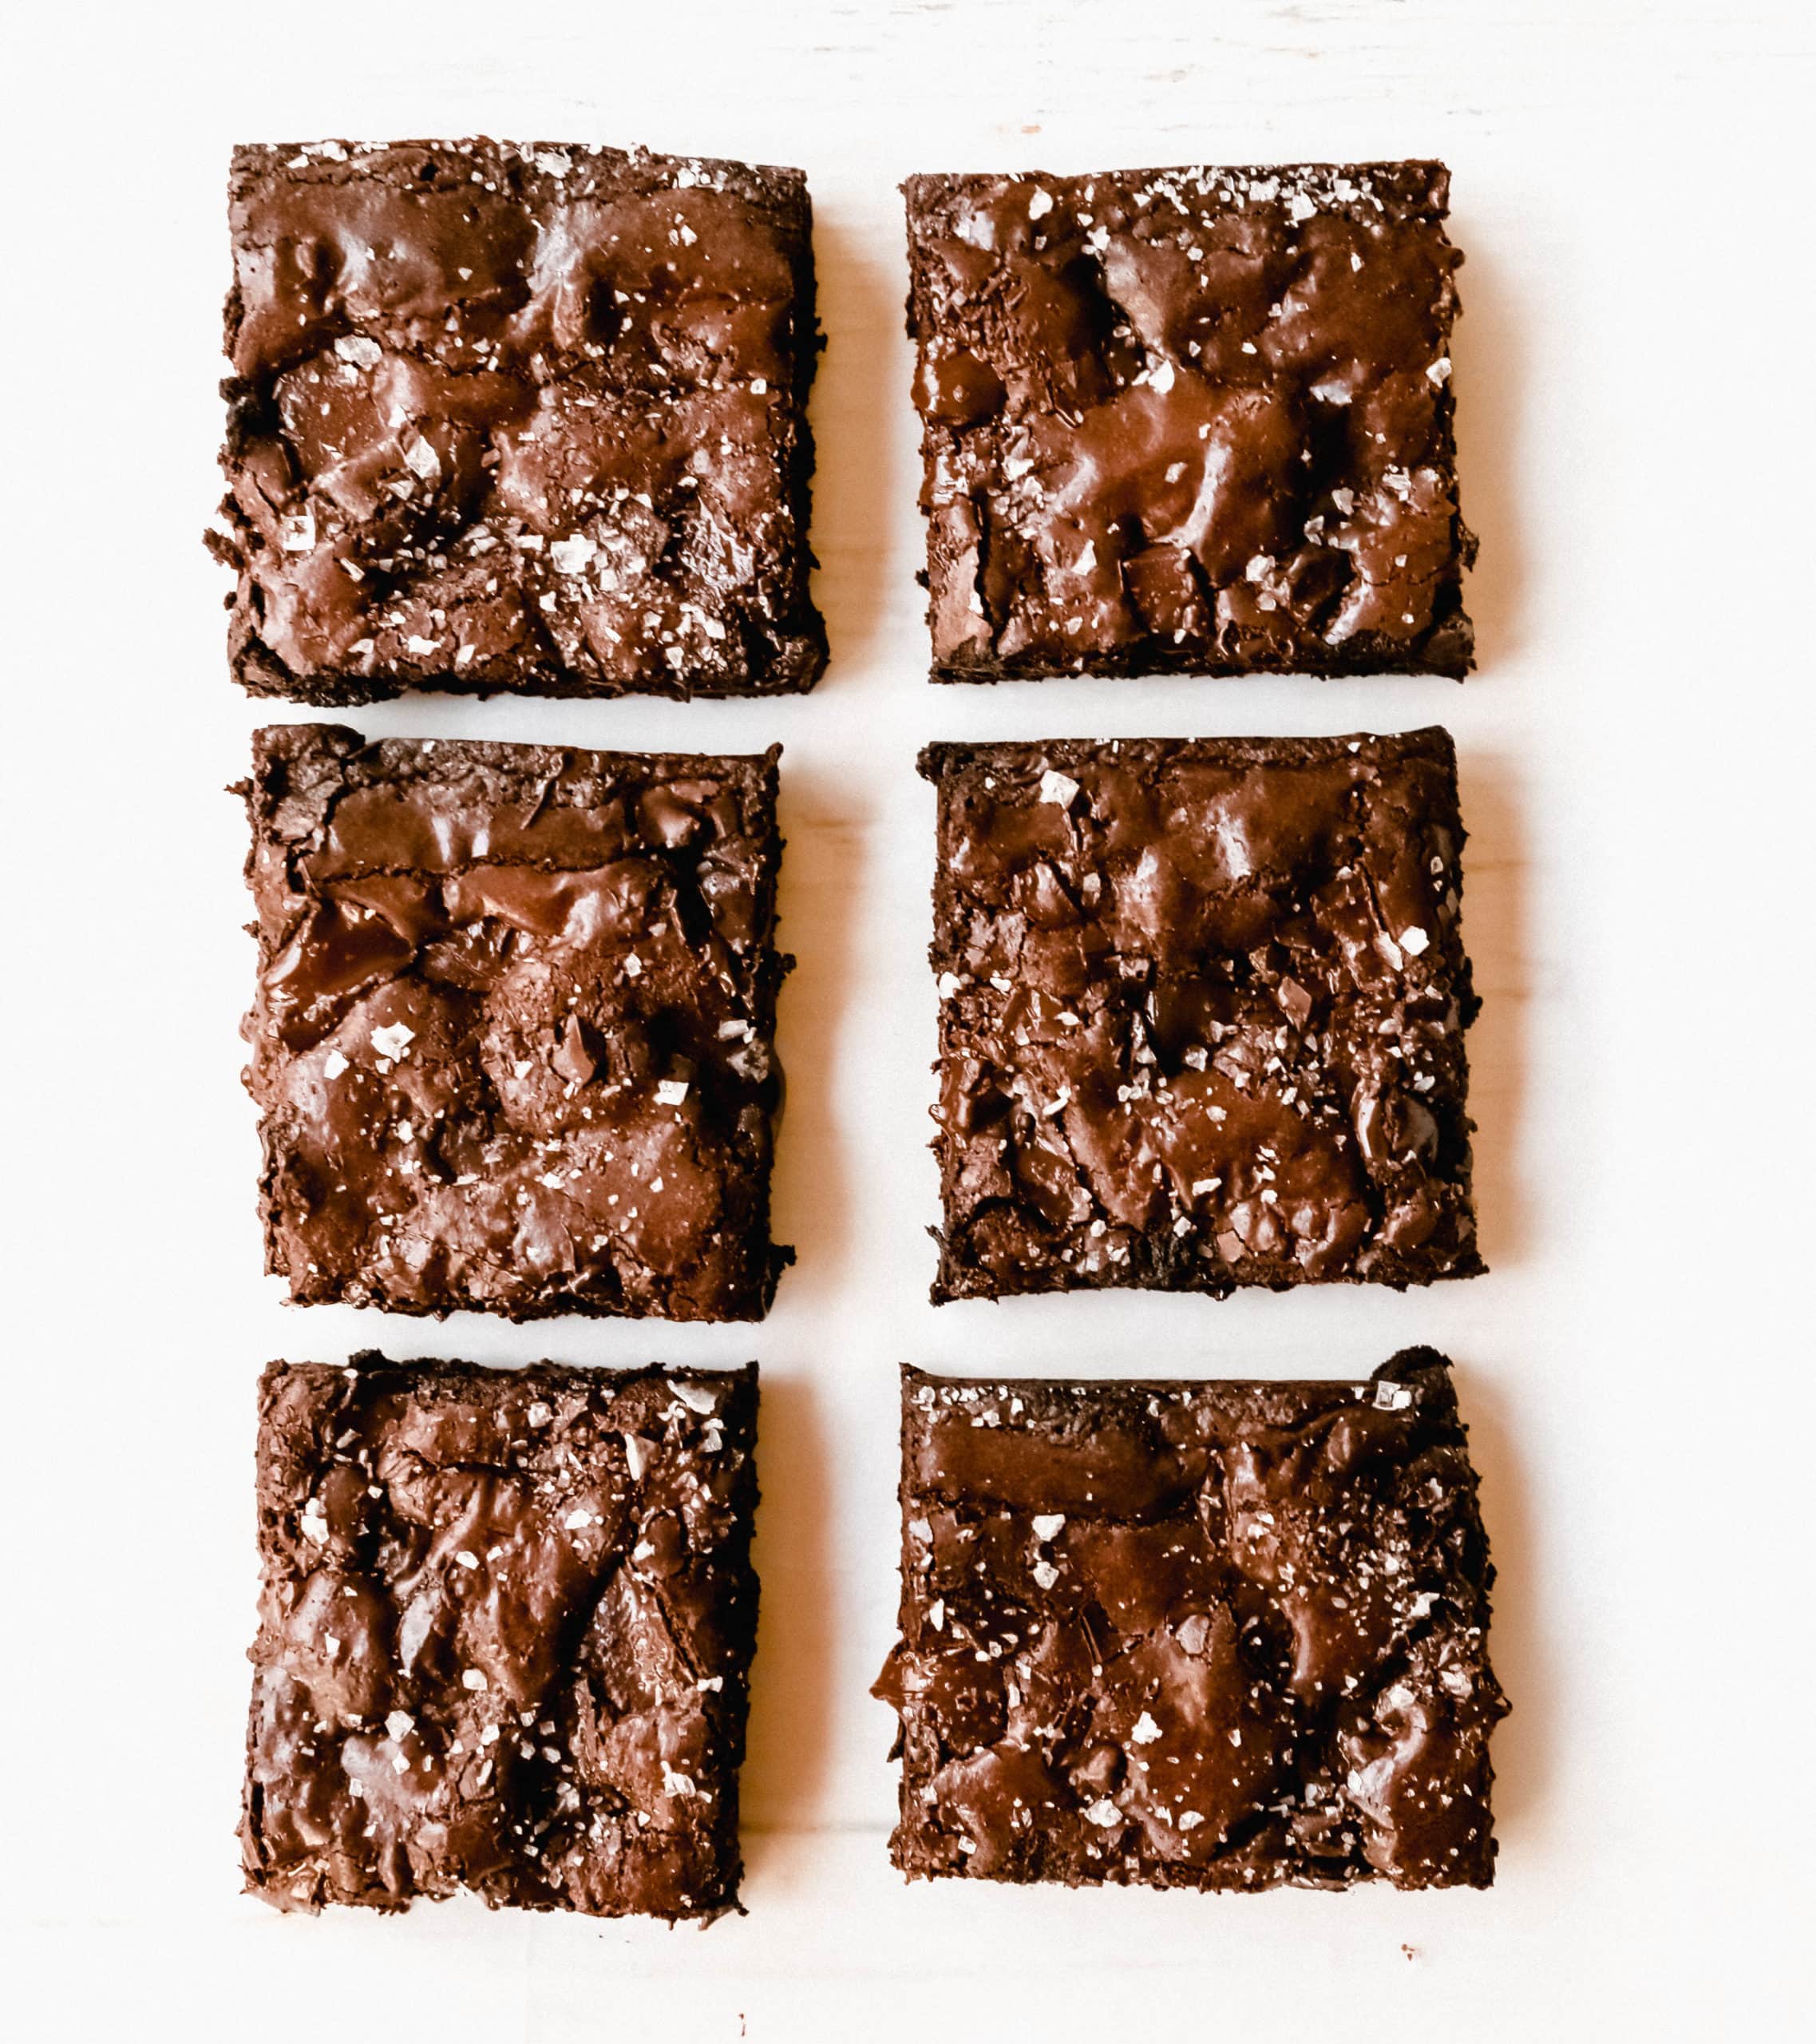 One Bowl Fudgy Chocolate Brownies How to make the easiest and quickest rich, decadent, fudgy, homemade chocolate brownies. These homemade brownies will knock your socks off! www.modernhoney.com #brownie #brownies #chocolate #chocolatebrownies